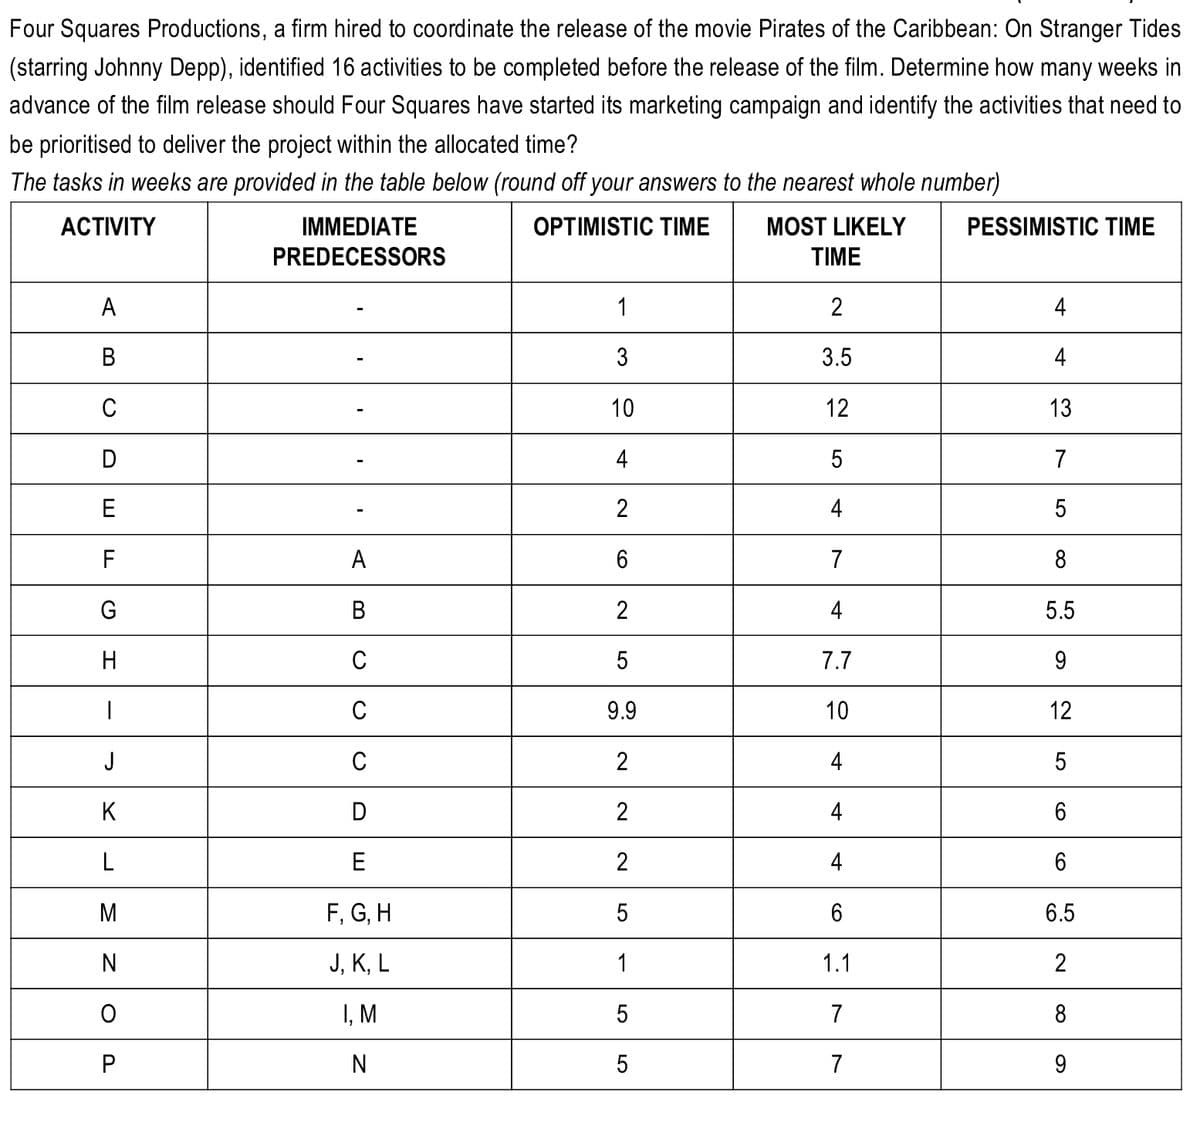 Four Squares Productions, a firm hired to coordinate the release of the movie Pirates of the Caribbean: On Stranger Tides
(starring Johnny Depp), identified 16 activities to be completed before the release of the film. Determine how many weeks in
advance of the film release should Four Squares have started its marketing campaign and identify the activities that need to
be prioritised to deliver the project within the allocated time?
The tasks in weeks are provided in the table below (round off your answers to the nearest whole number)
ACTIVITY
OPTIMISTIC TIME
MOST LIKELY
TIME
2
3.5
12
5
4
7
4
7.7
10
4
A
B
C
DE
TI
F
G
H
|
J
K
L
M
N
P
IMMEDIATE
PREDECESSORS
A
B
C
C
C
D
E
F, G, H
J, K, L
I, M
N
1
3
10
4
2
6
2
5
9.9
2
2
2
5
1
5
LO
5
4
4
6
1.1
7
7
PESSIMISTIC TIME
4
4
13
7
5
8
5.5
9
12
5
6
6
6.5
2
8
9